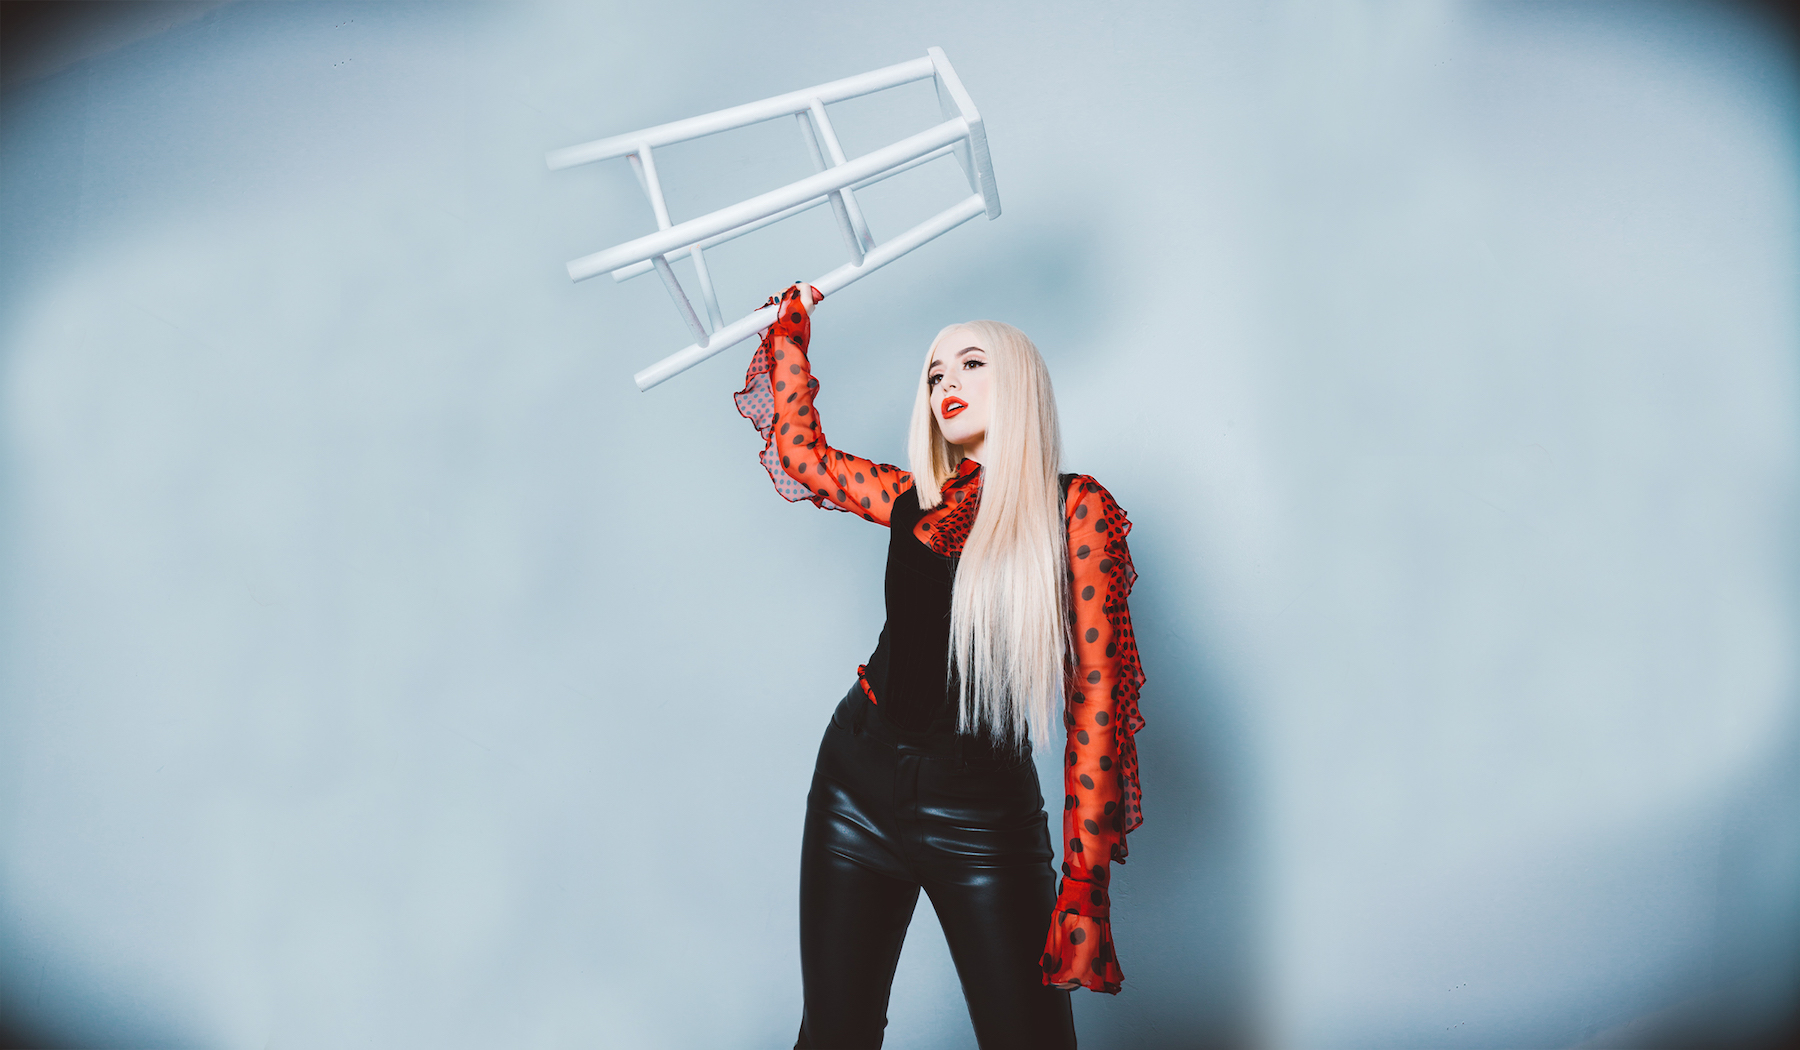 SOTD: Ava Max is putting the pop back in popstar